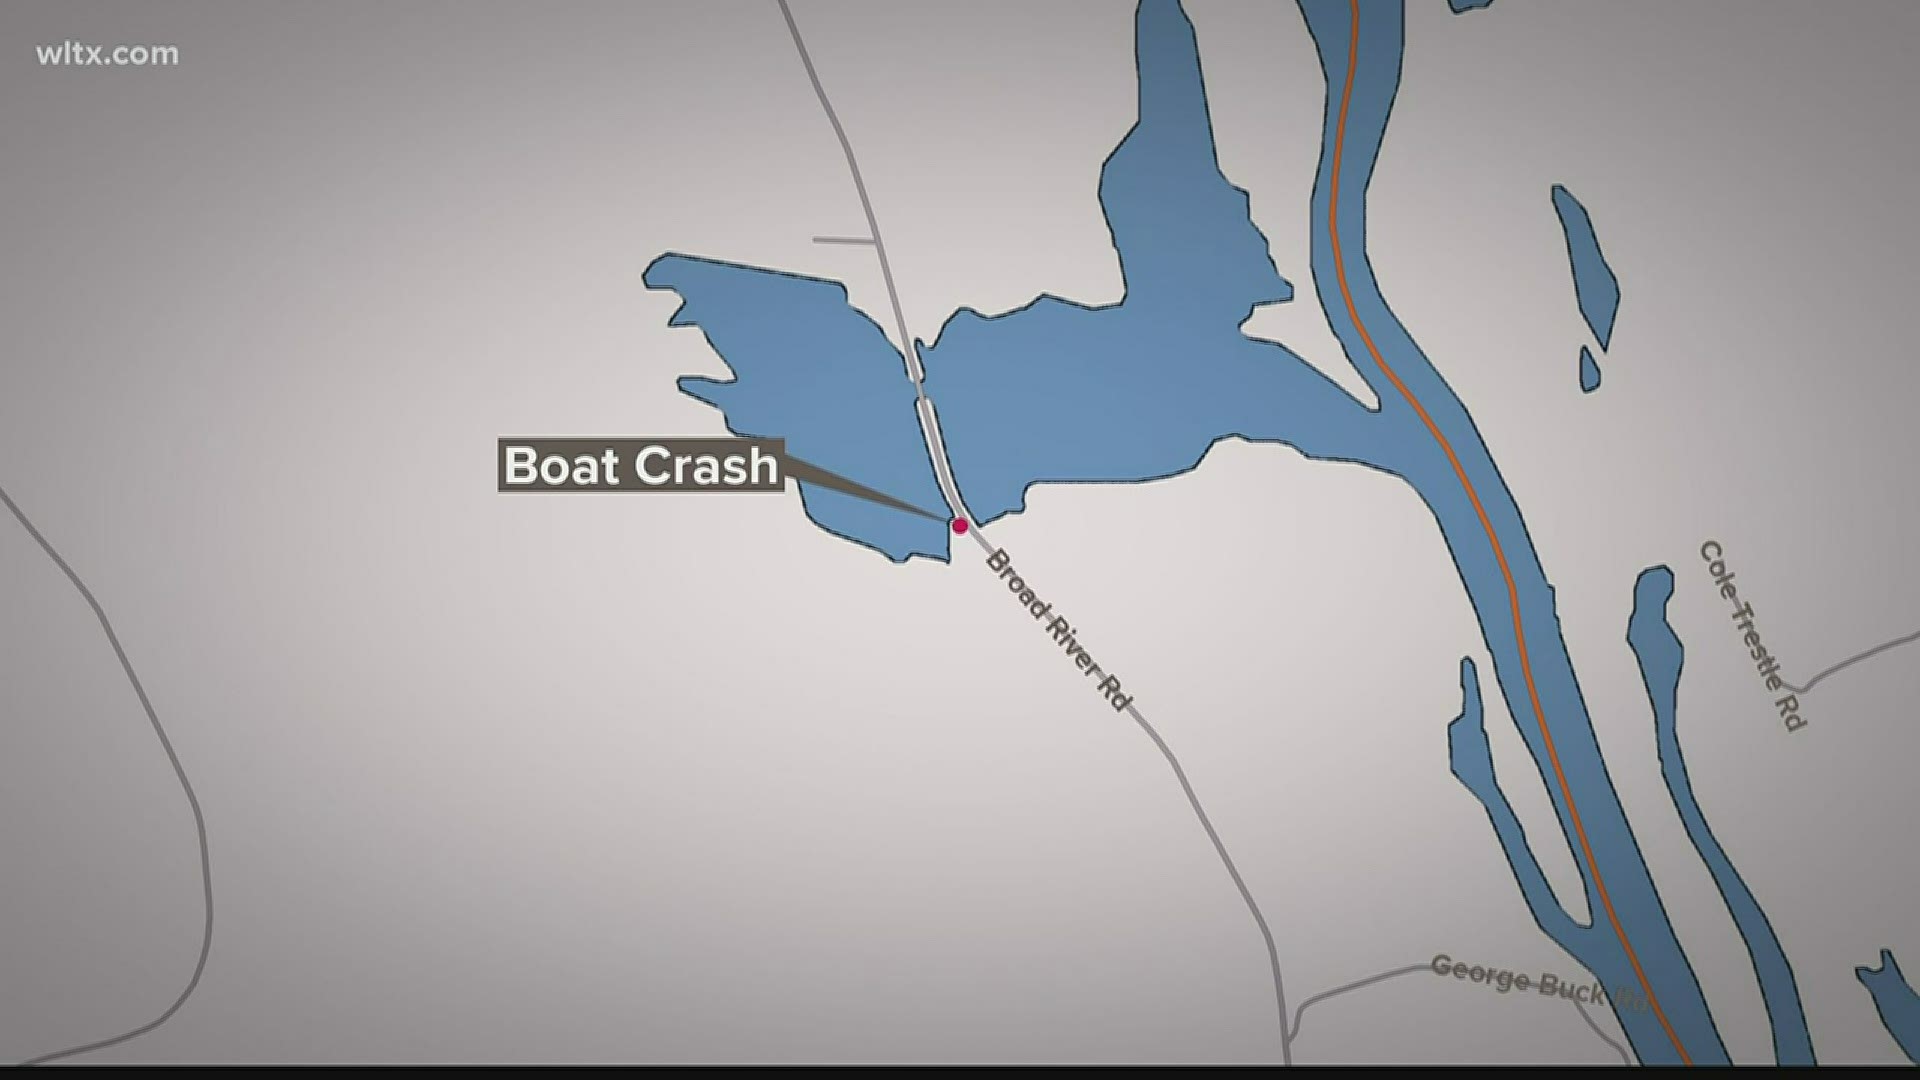 It happened around 9:30p.m. as the boats were returning to a landing in Newberry county.